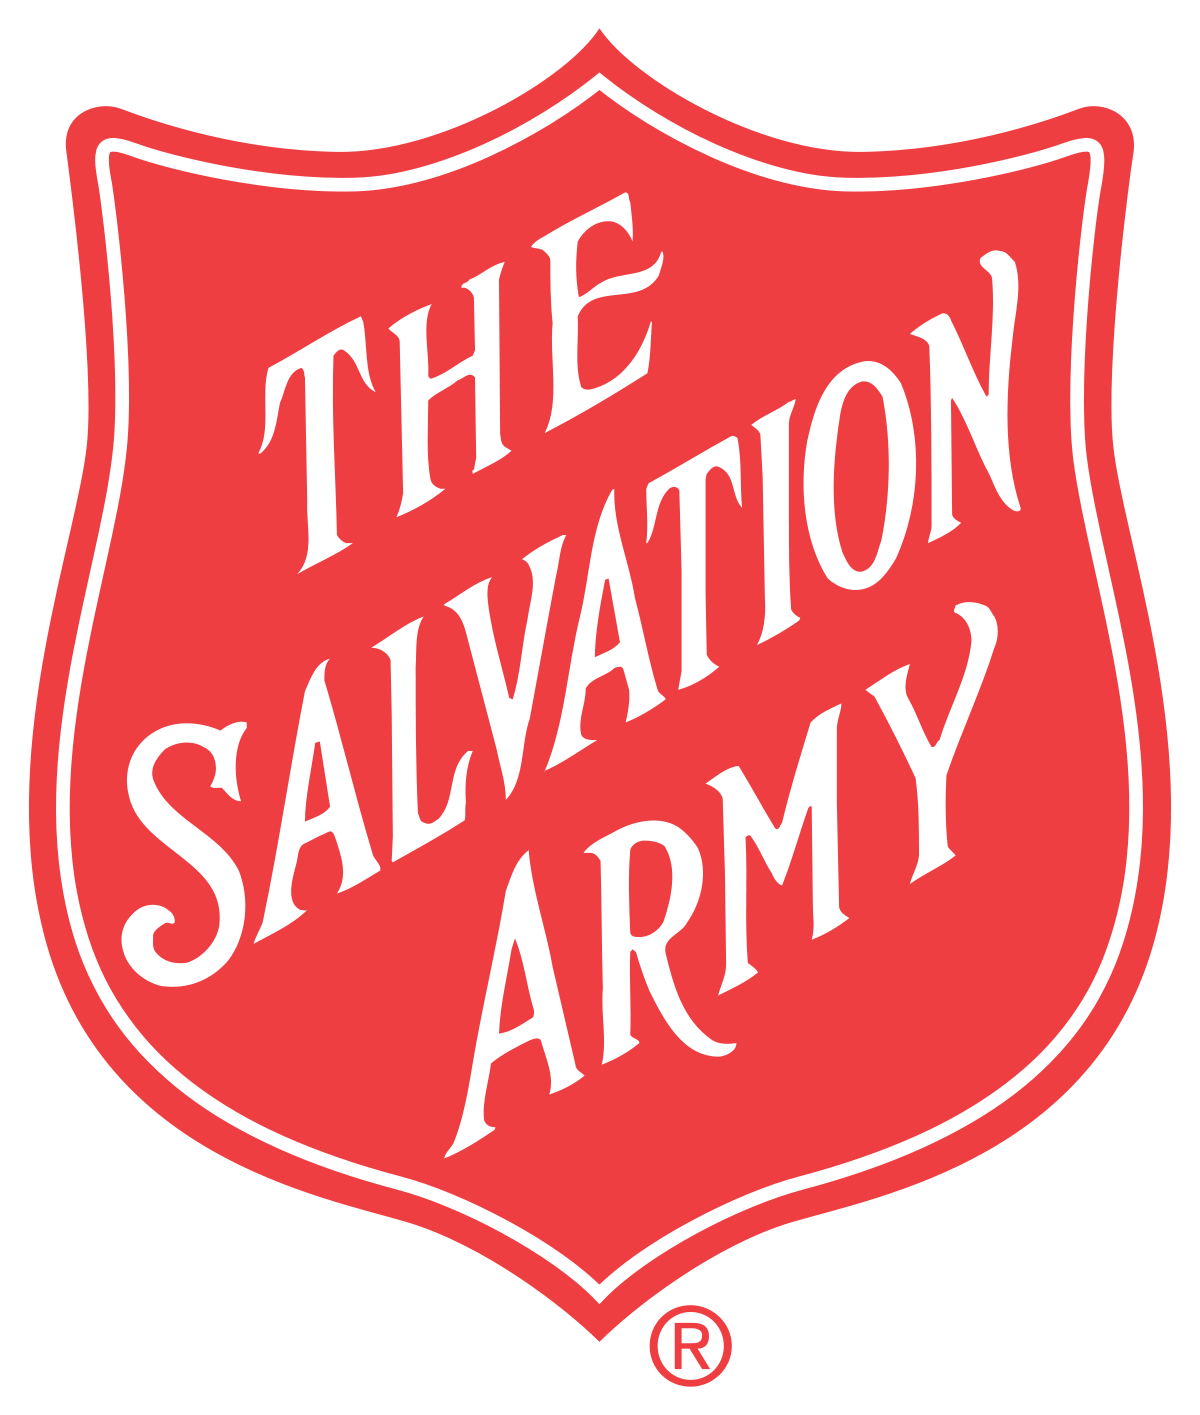 Green and Red Shield Company Logo - The Salvation Army